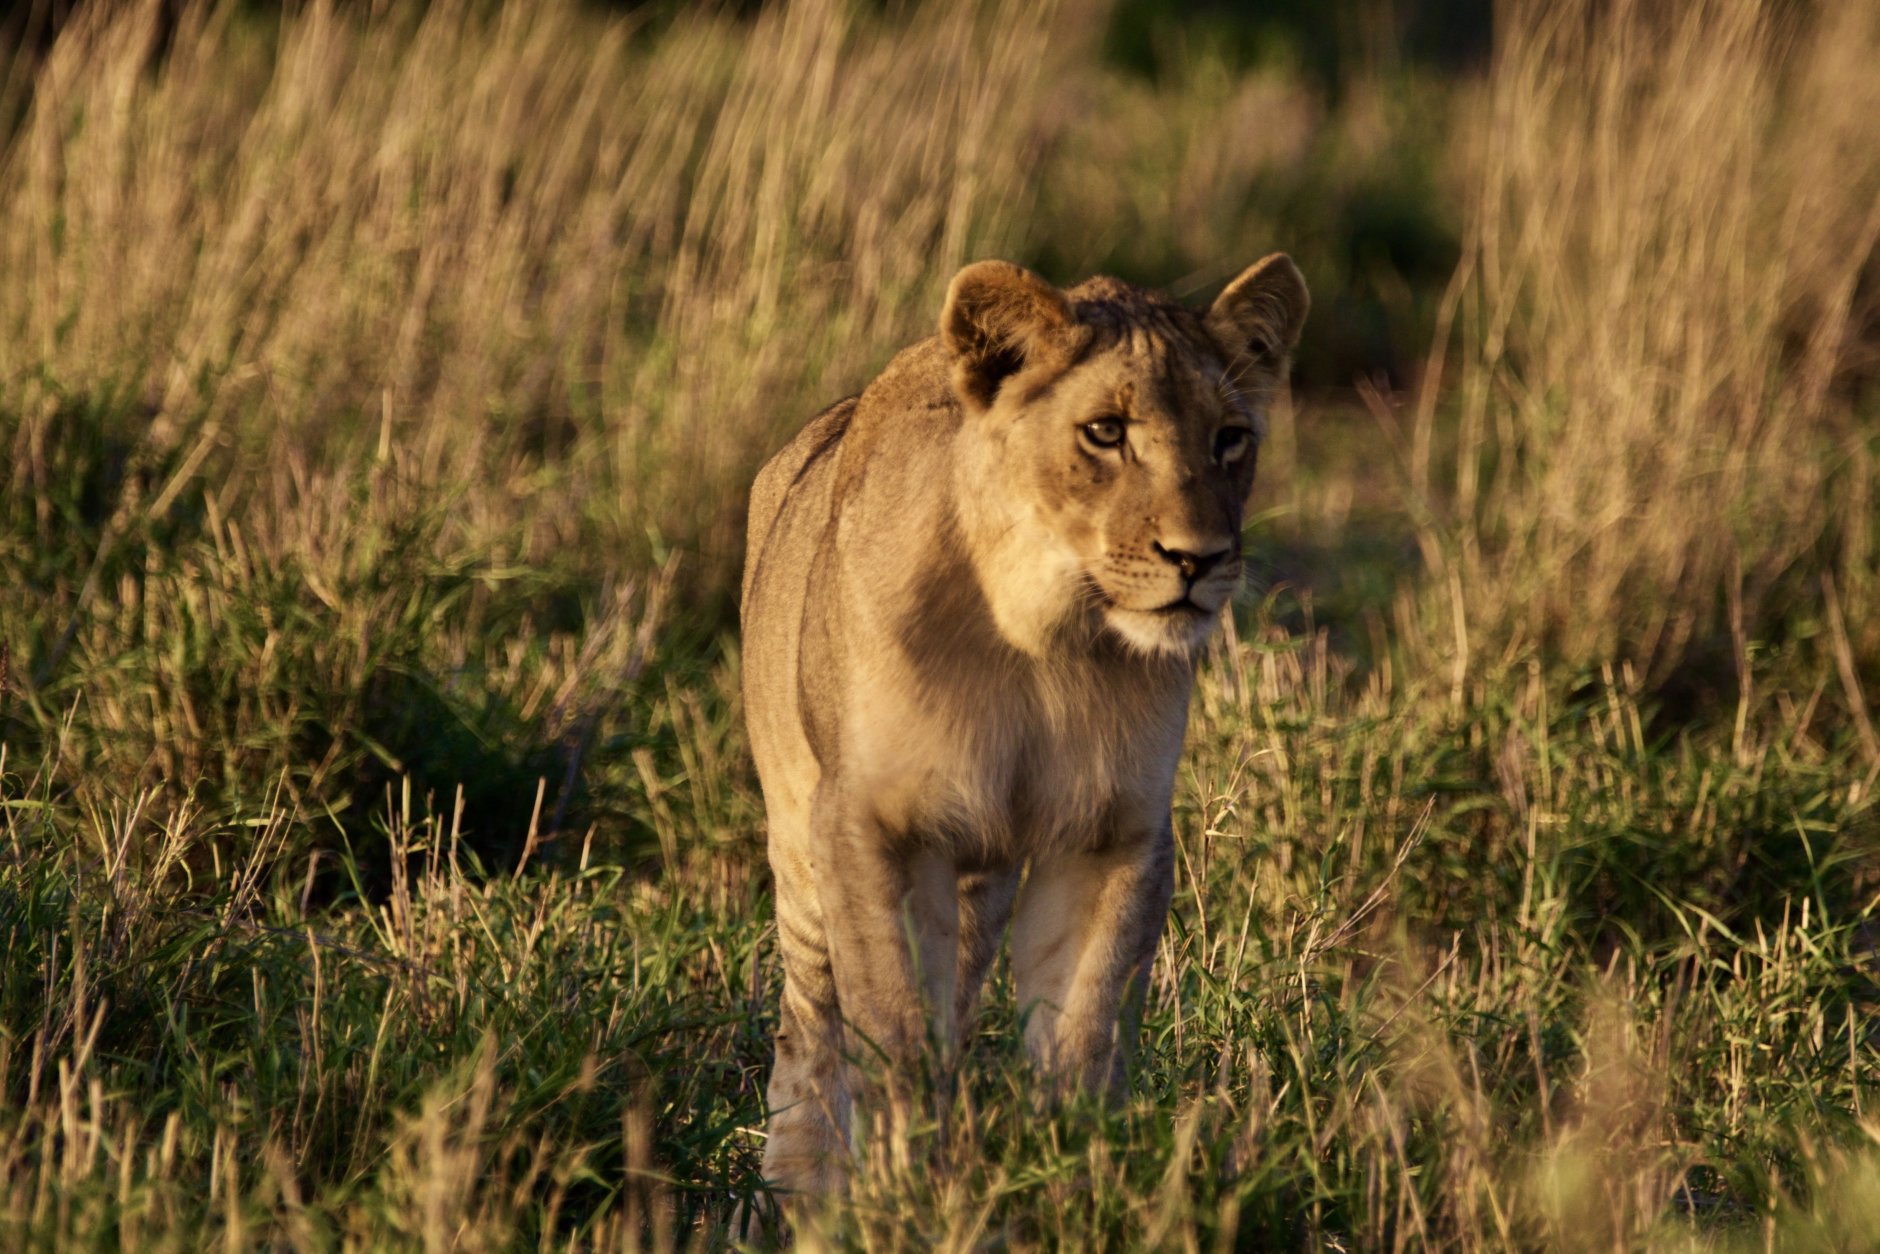 Lioness on the golden hour